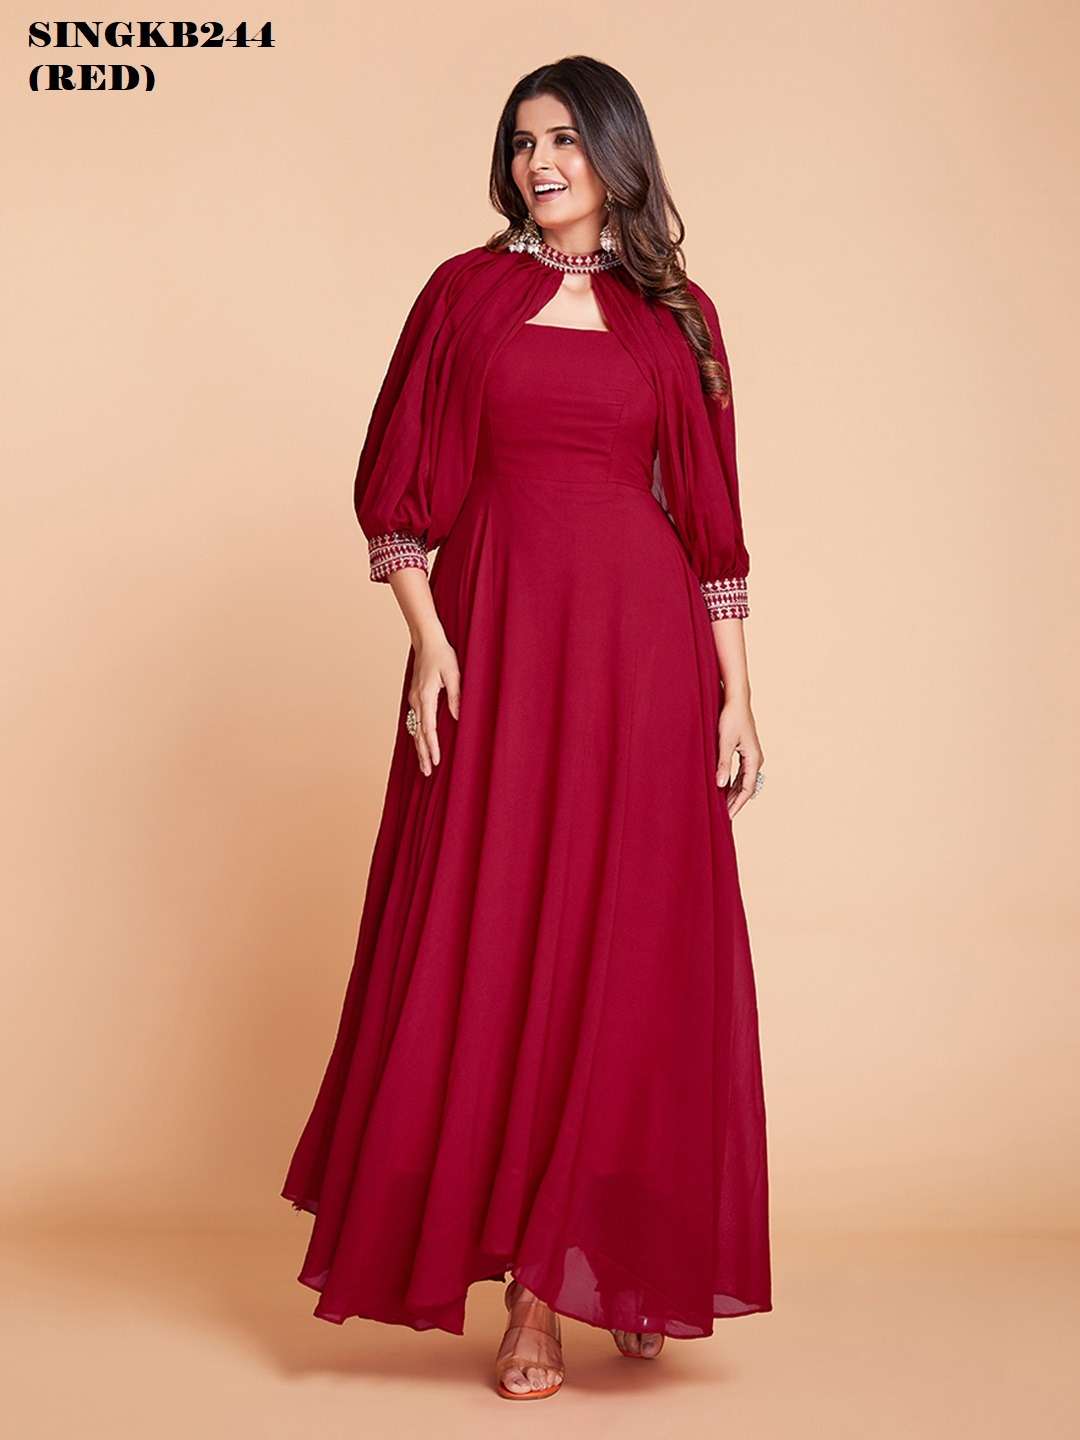 Arya Designs Singkb 244 Red Partywear Designer Gown Latest Collection